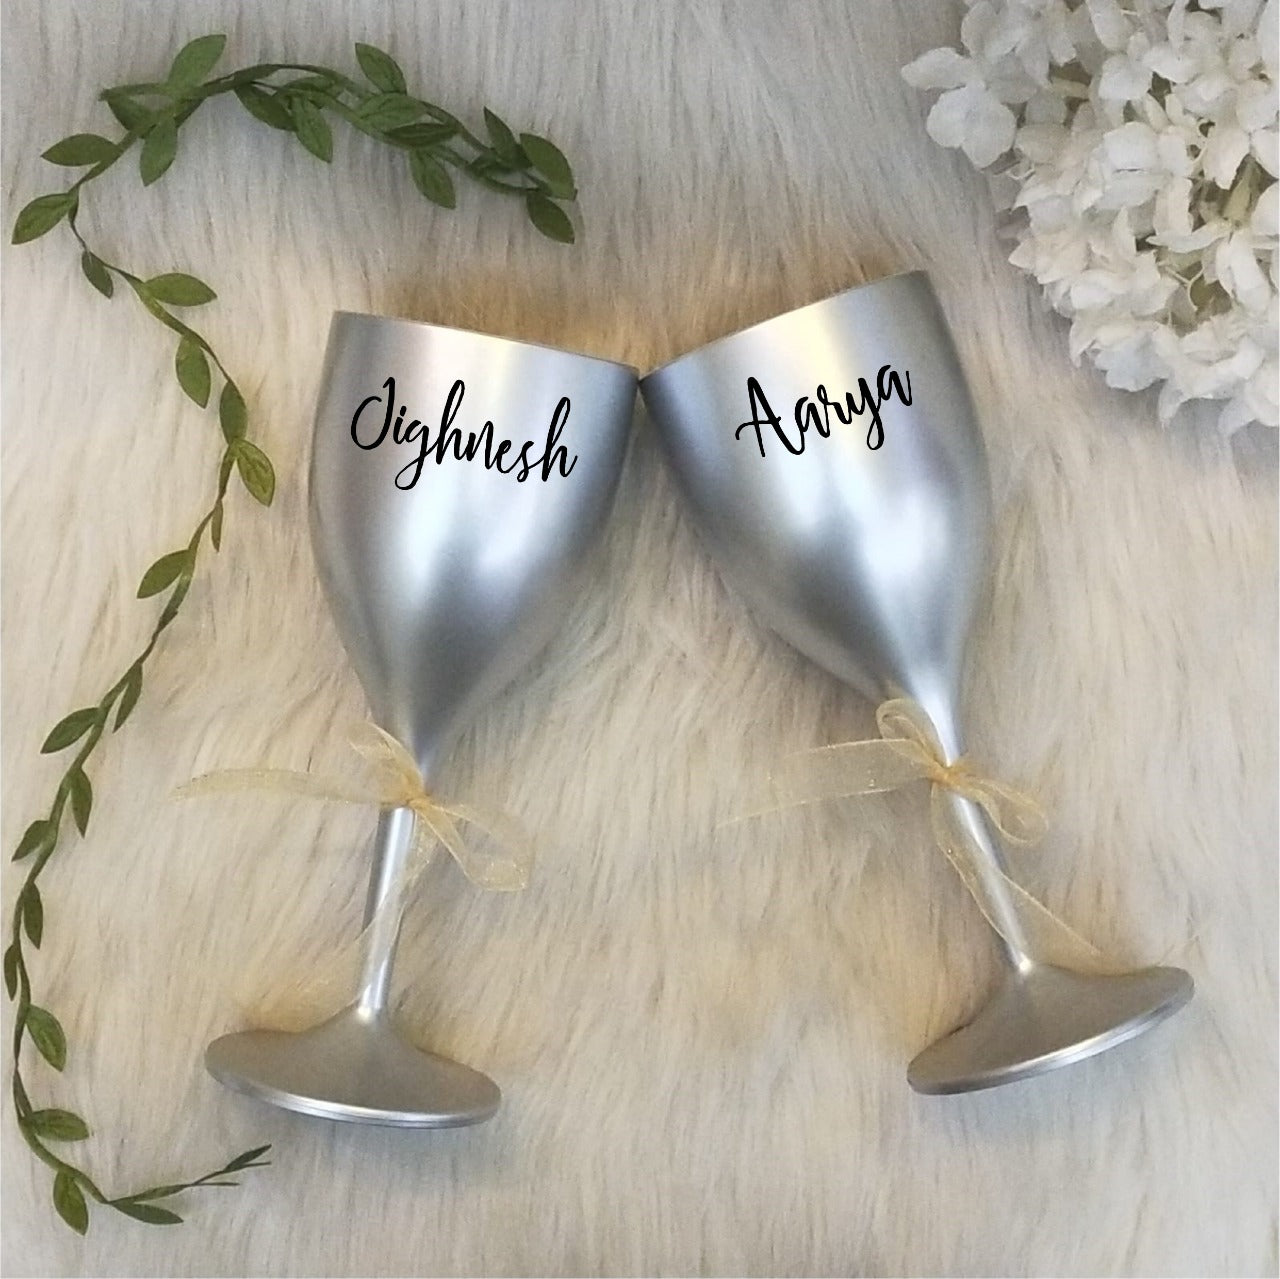 Unbreakable Wine Glass with Customisable Name - Set of 2  Silver